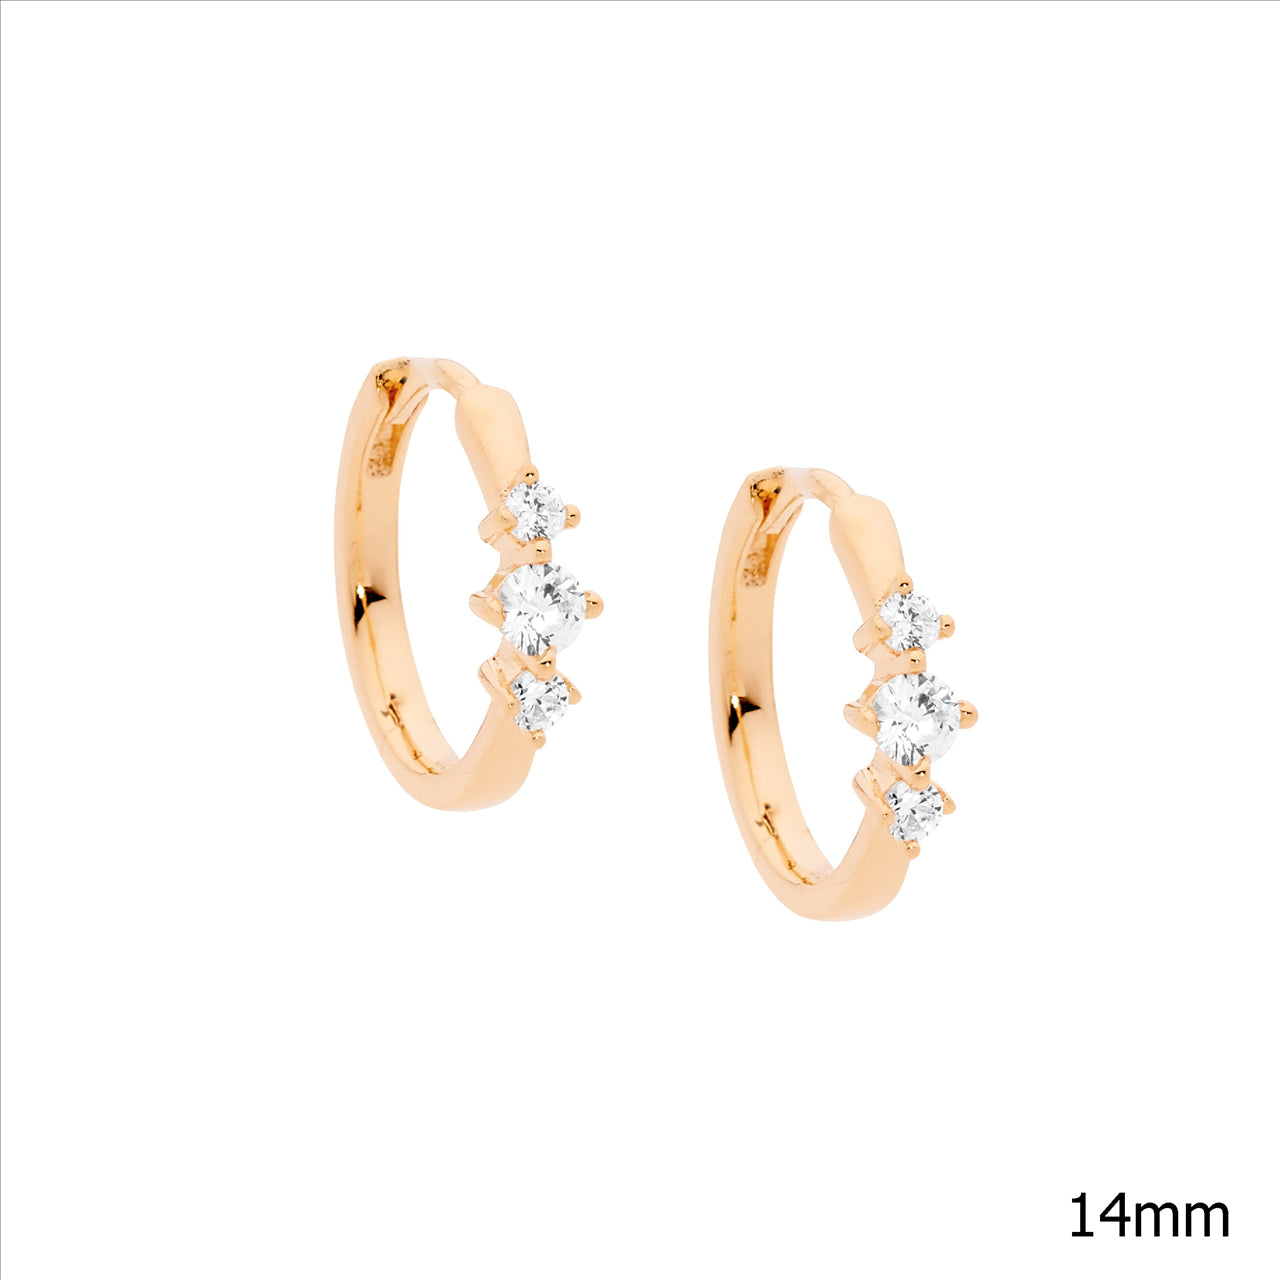 SS 14mm hoop earrings w/ 3 wh cz feature, rose gold plating